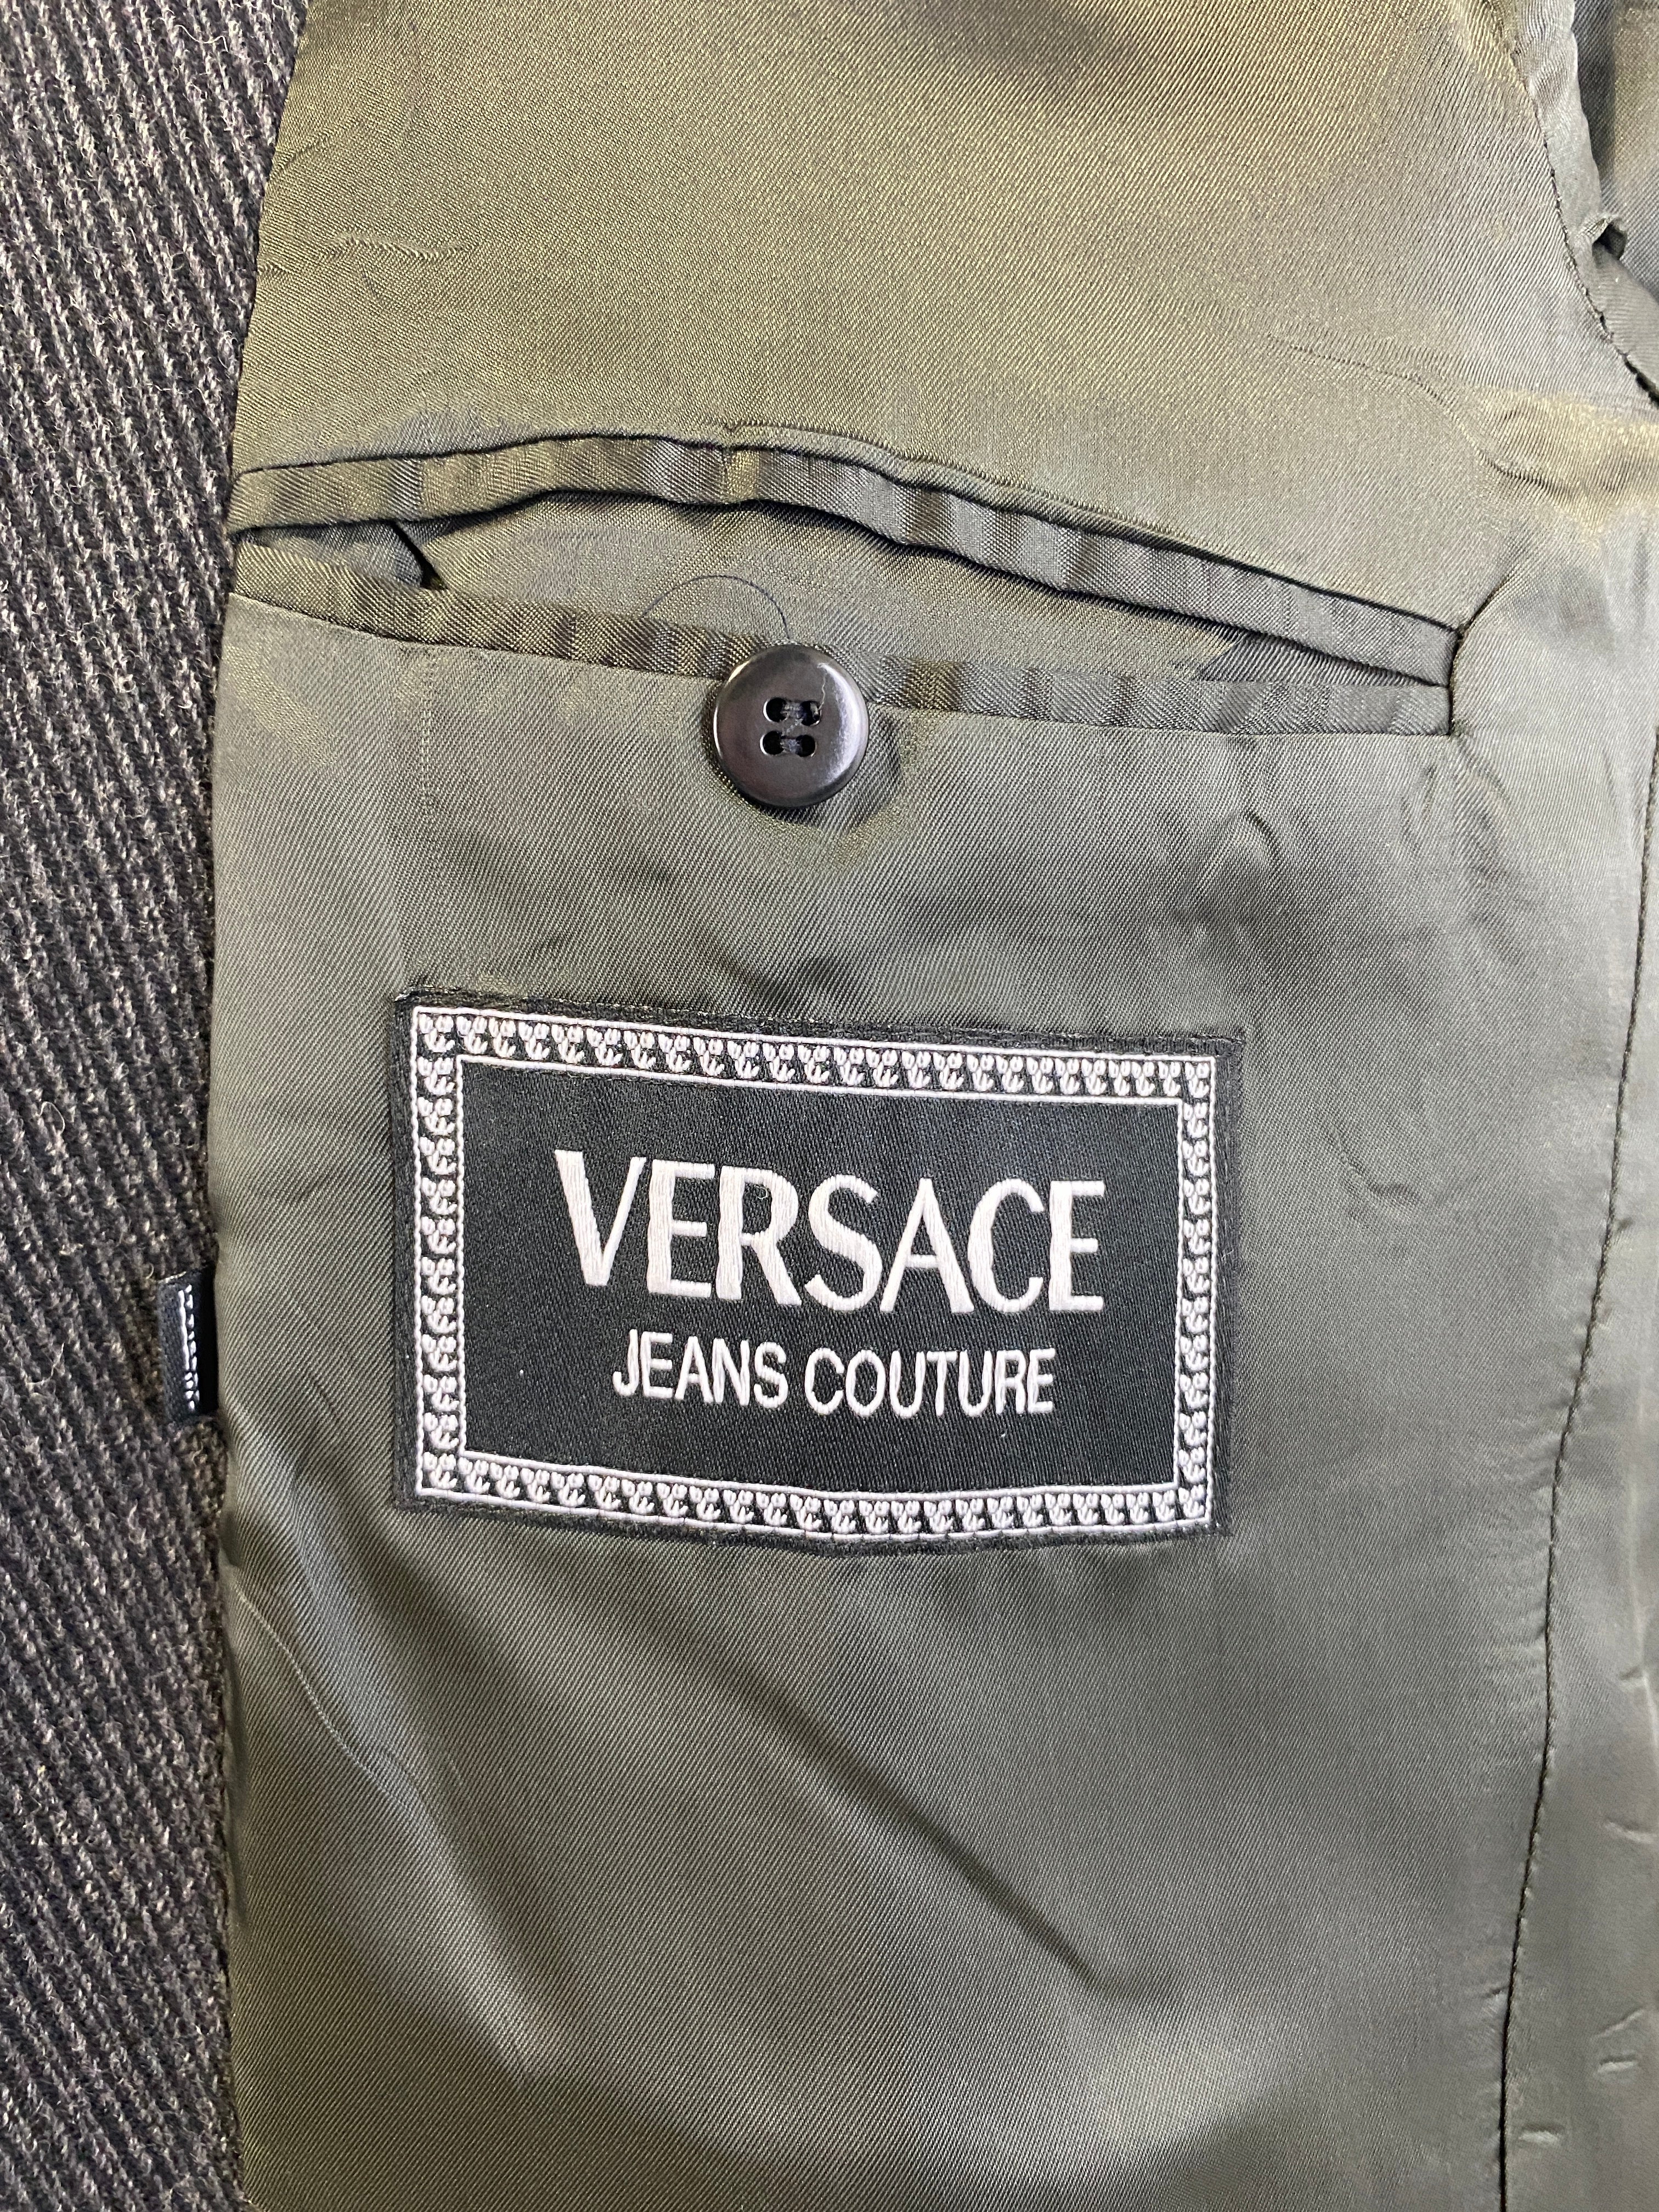 VERSACE Jeans Couture, women's coat size M in wool and c…